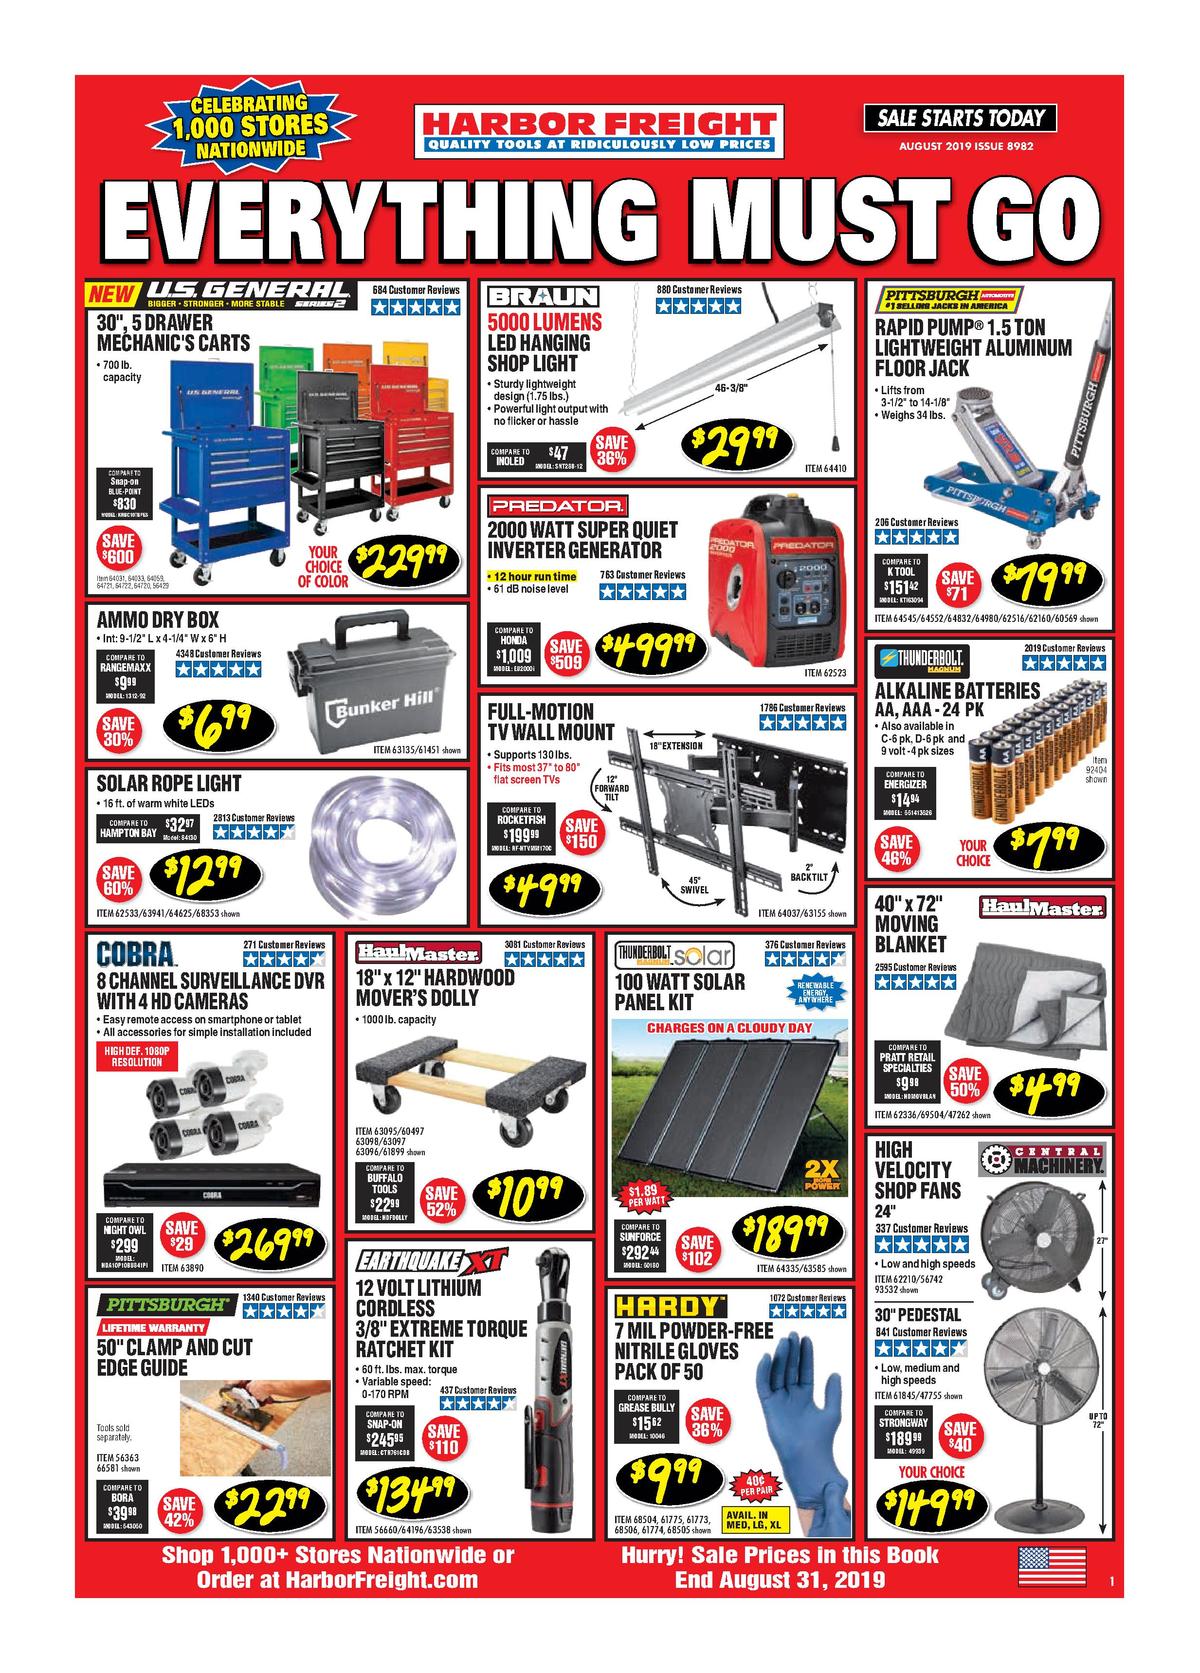 Harbor Freight Tools Best Offers & Special Buys from August 1